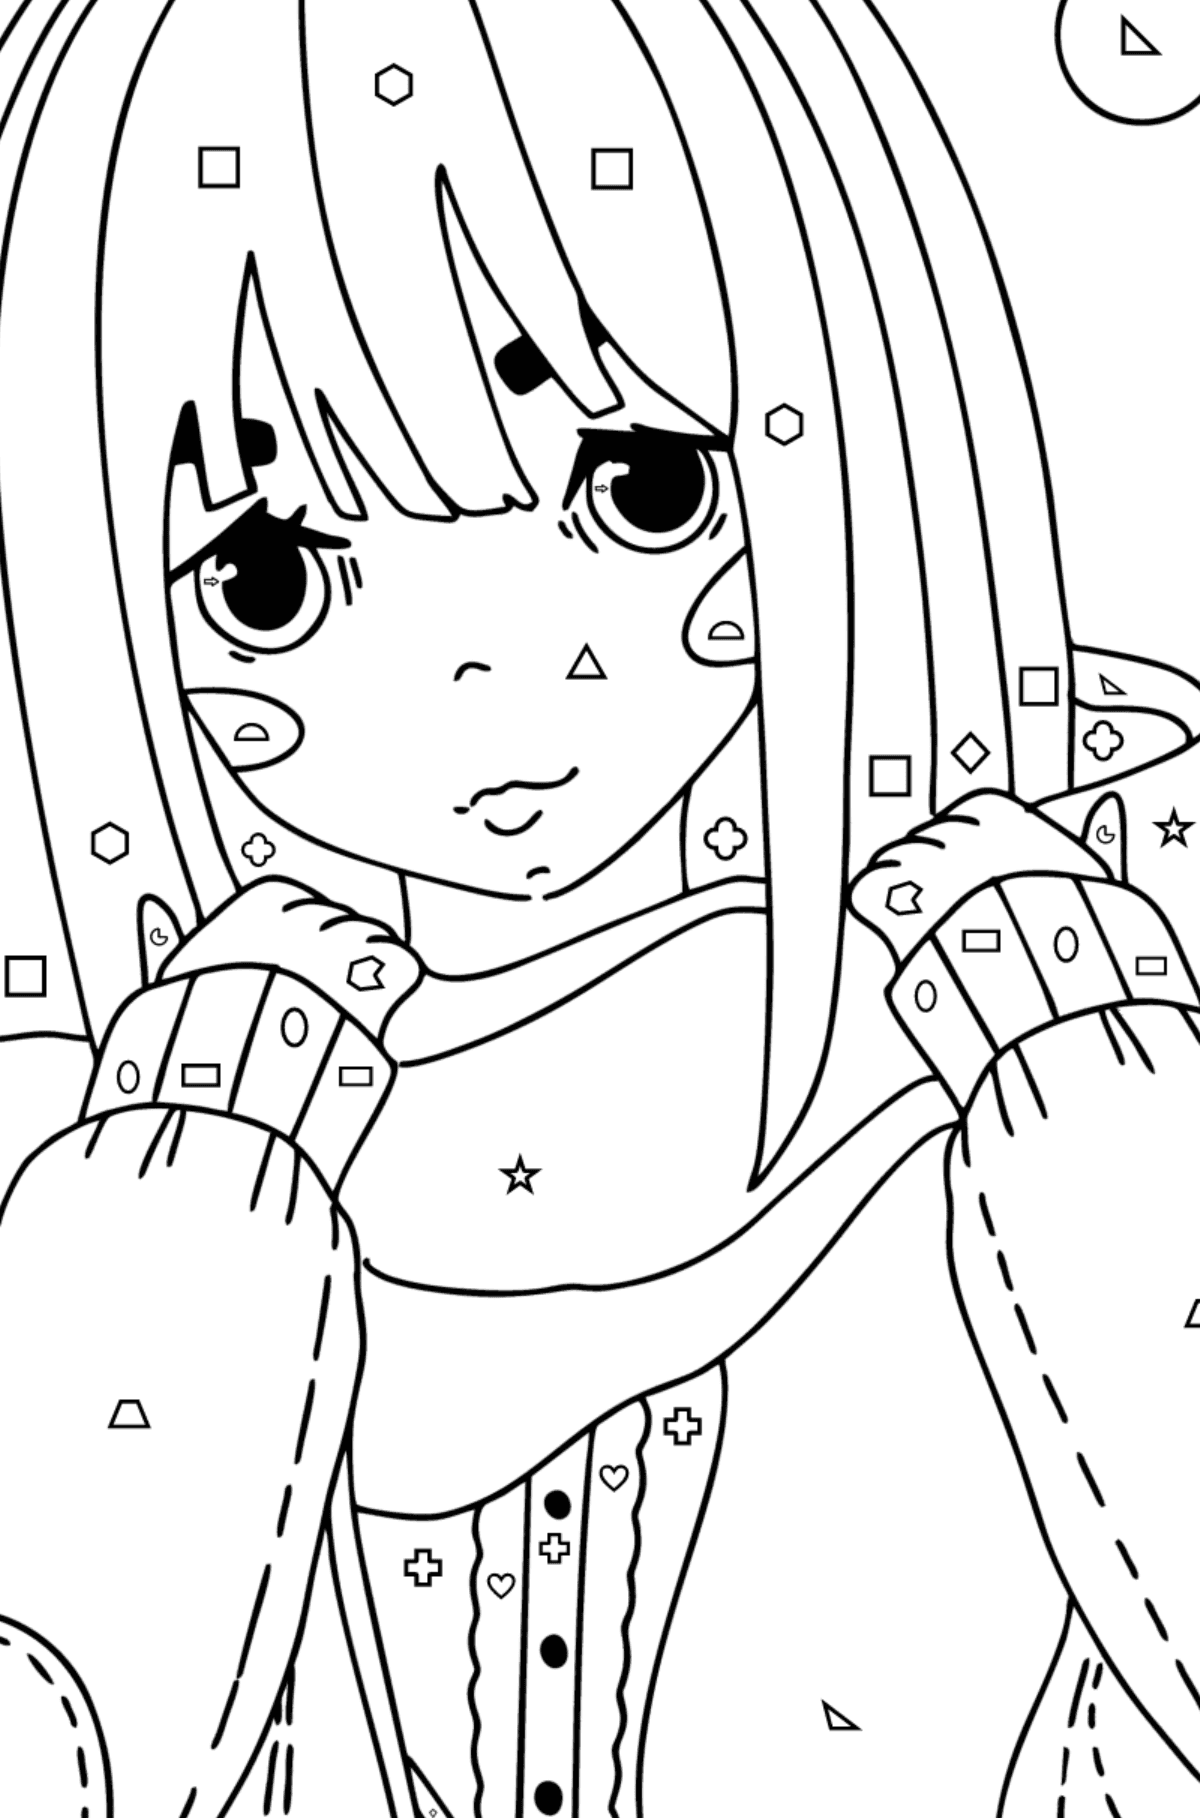 Cool anime girl coloring page - Coloring by Geometric Shapes for Kids